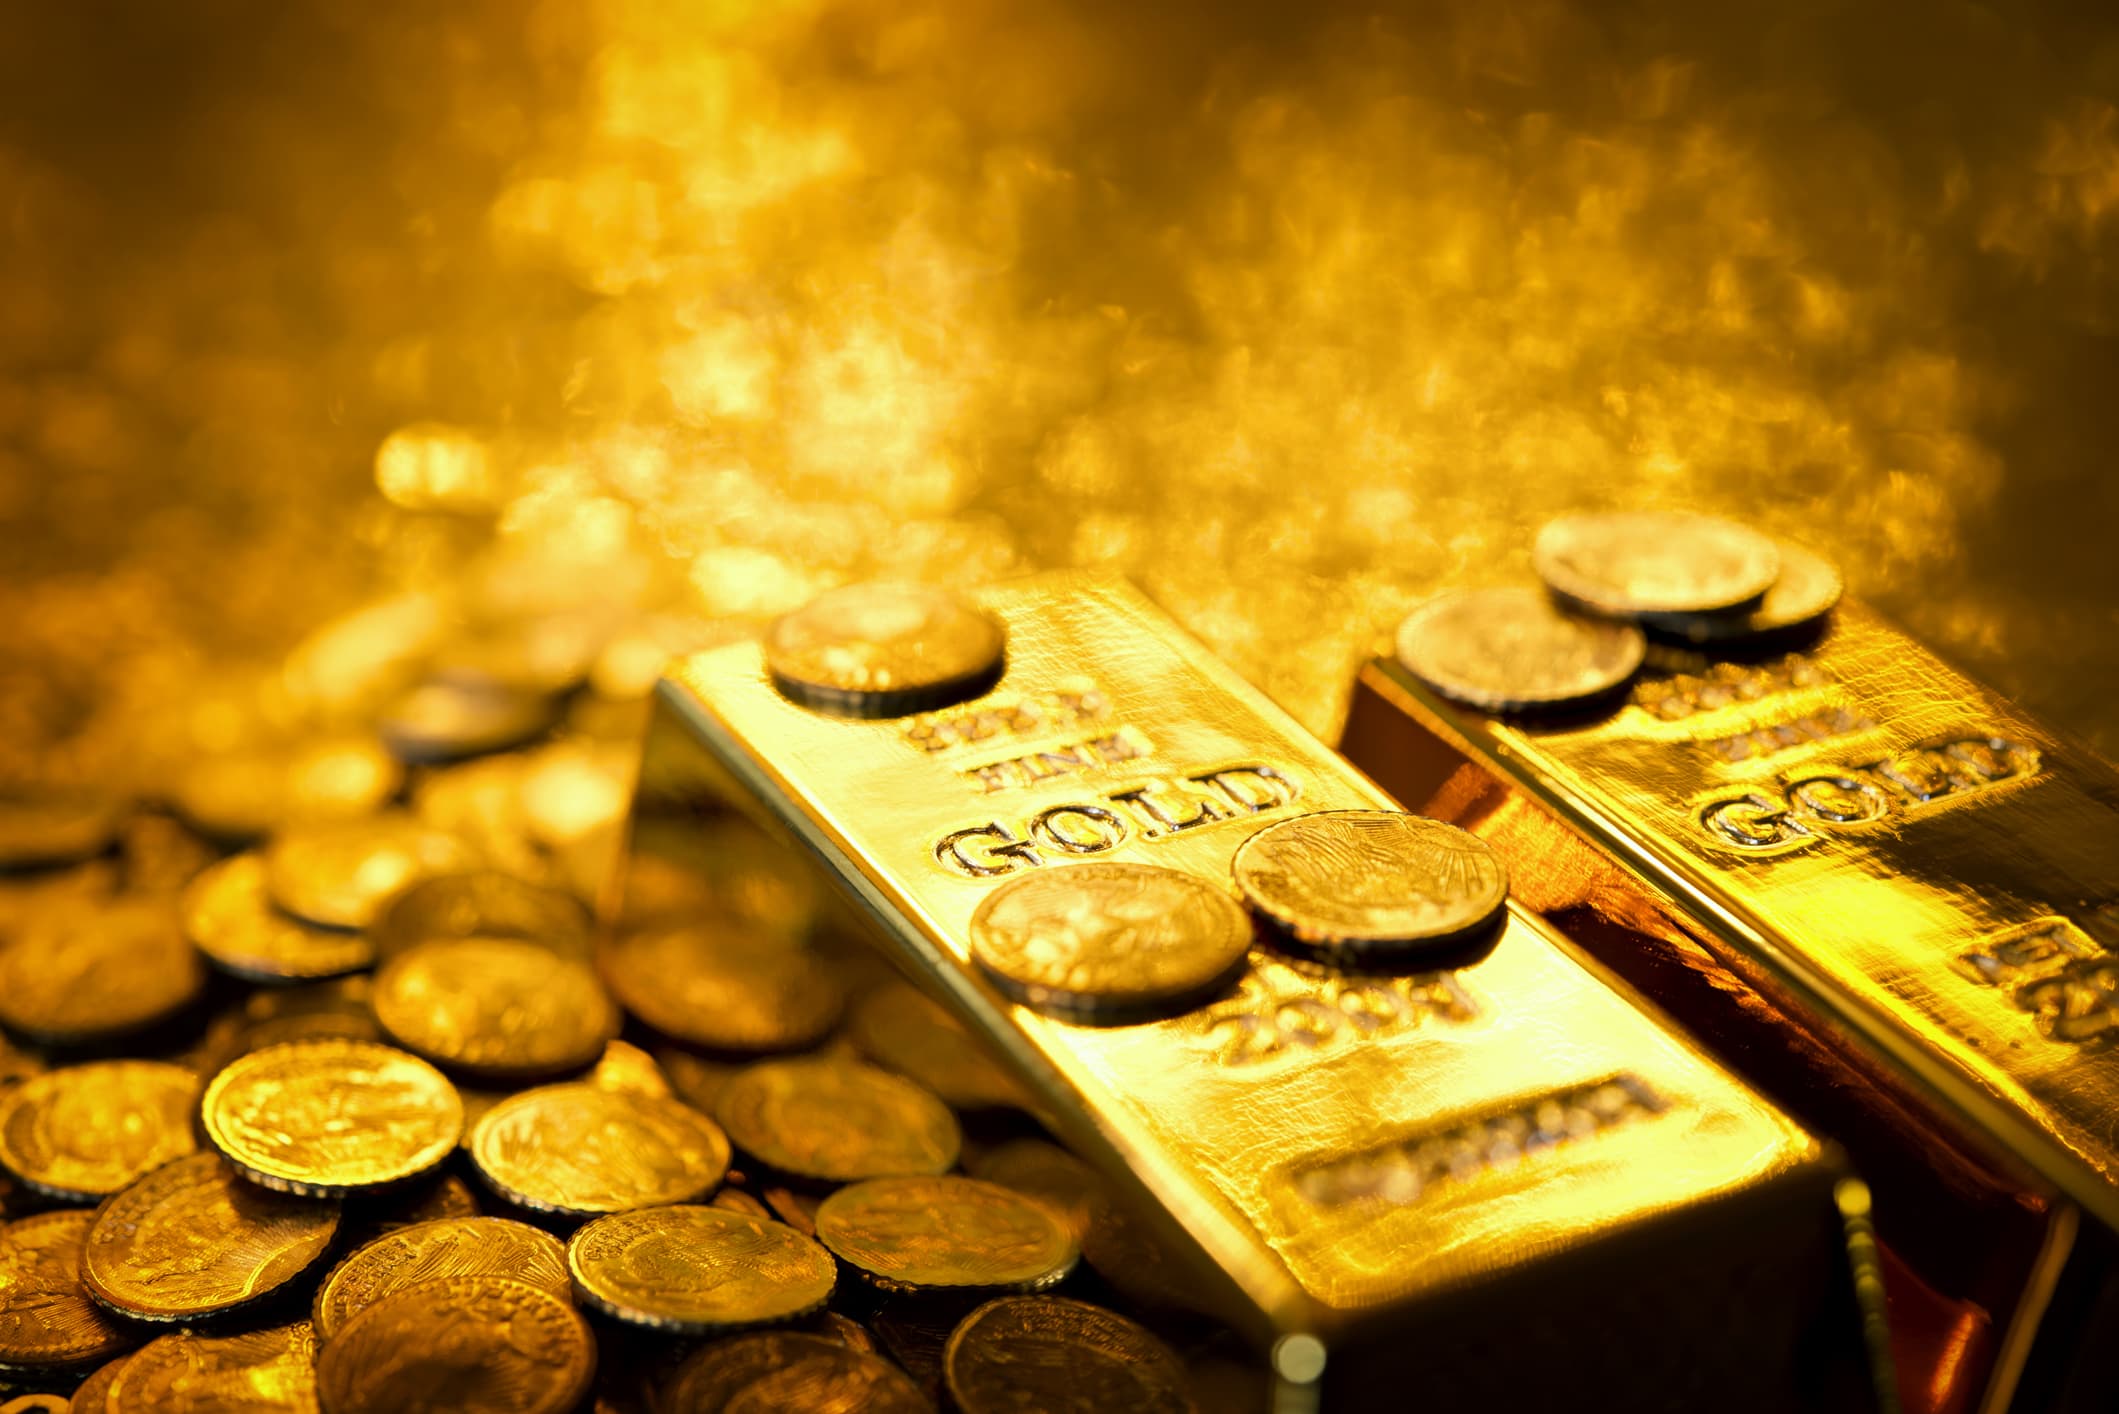 Gold prices hit a new record high amid expectations of a Fed cut